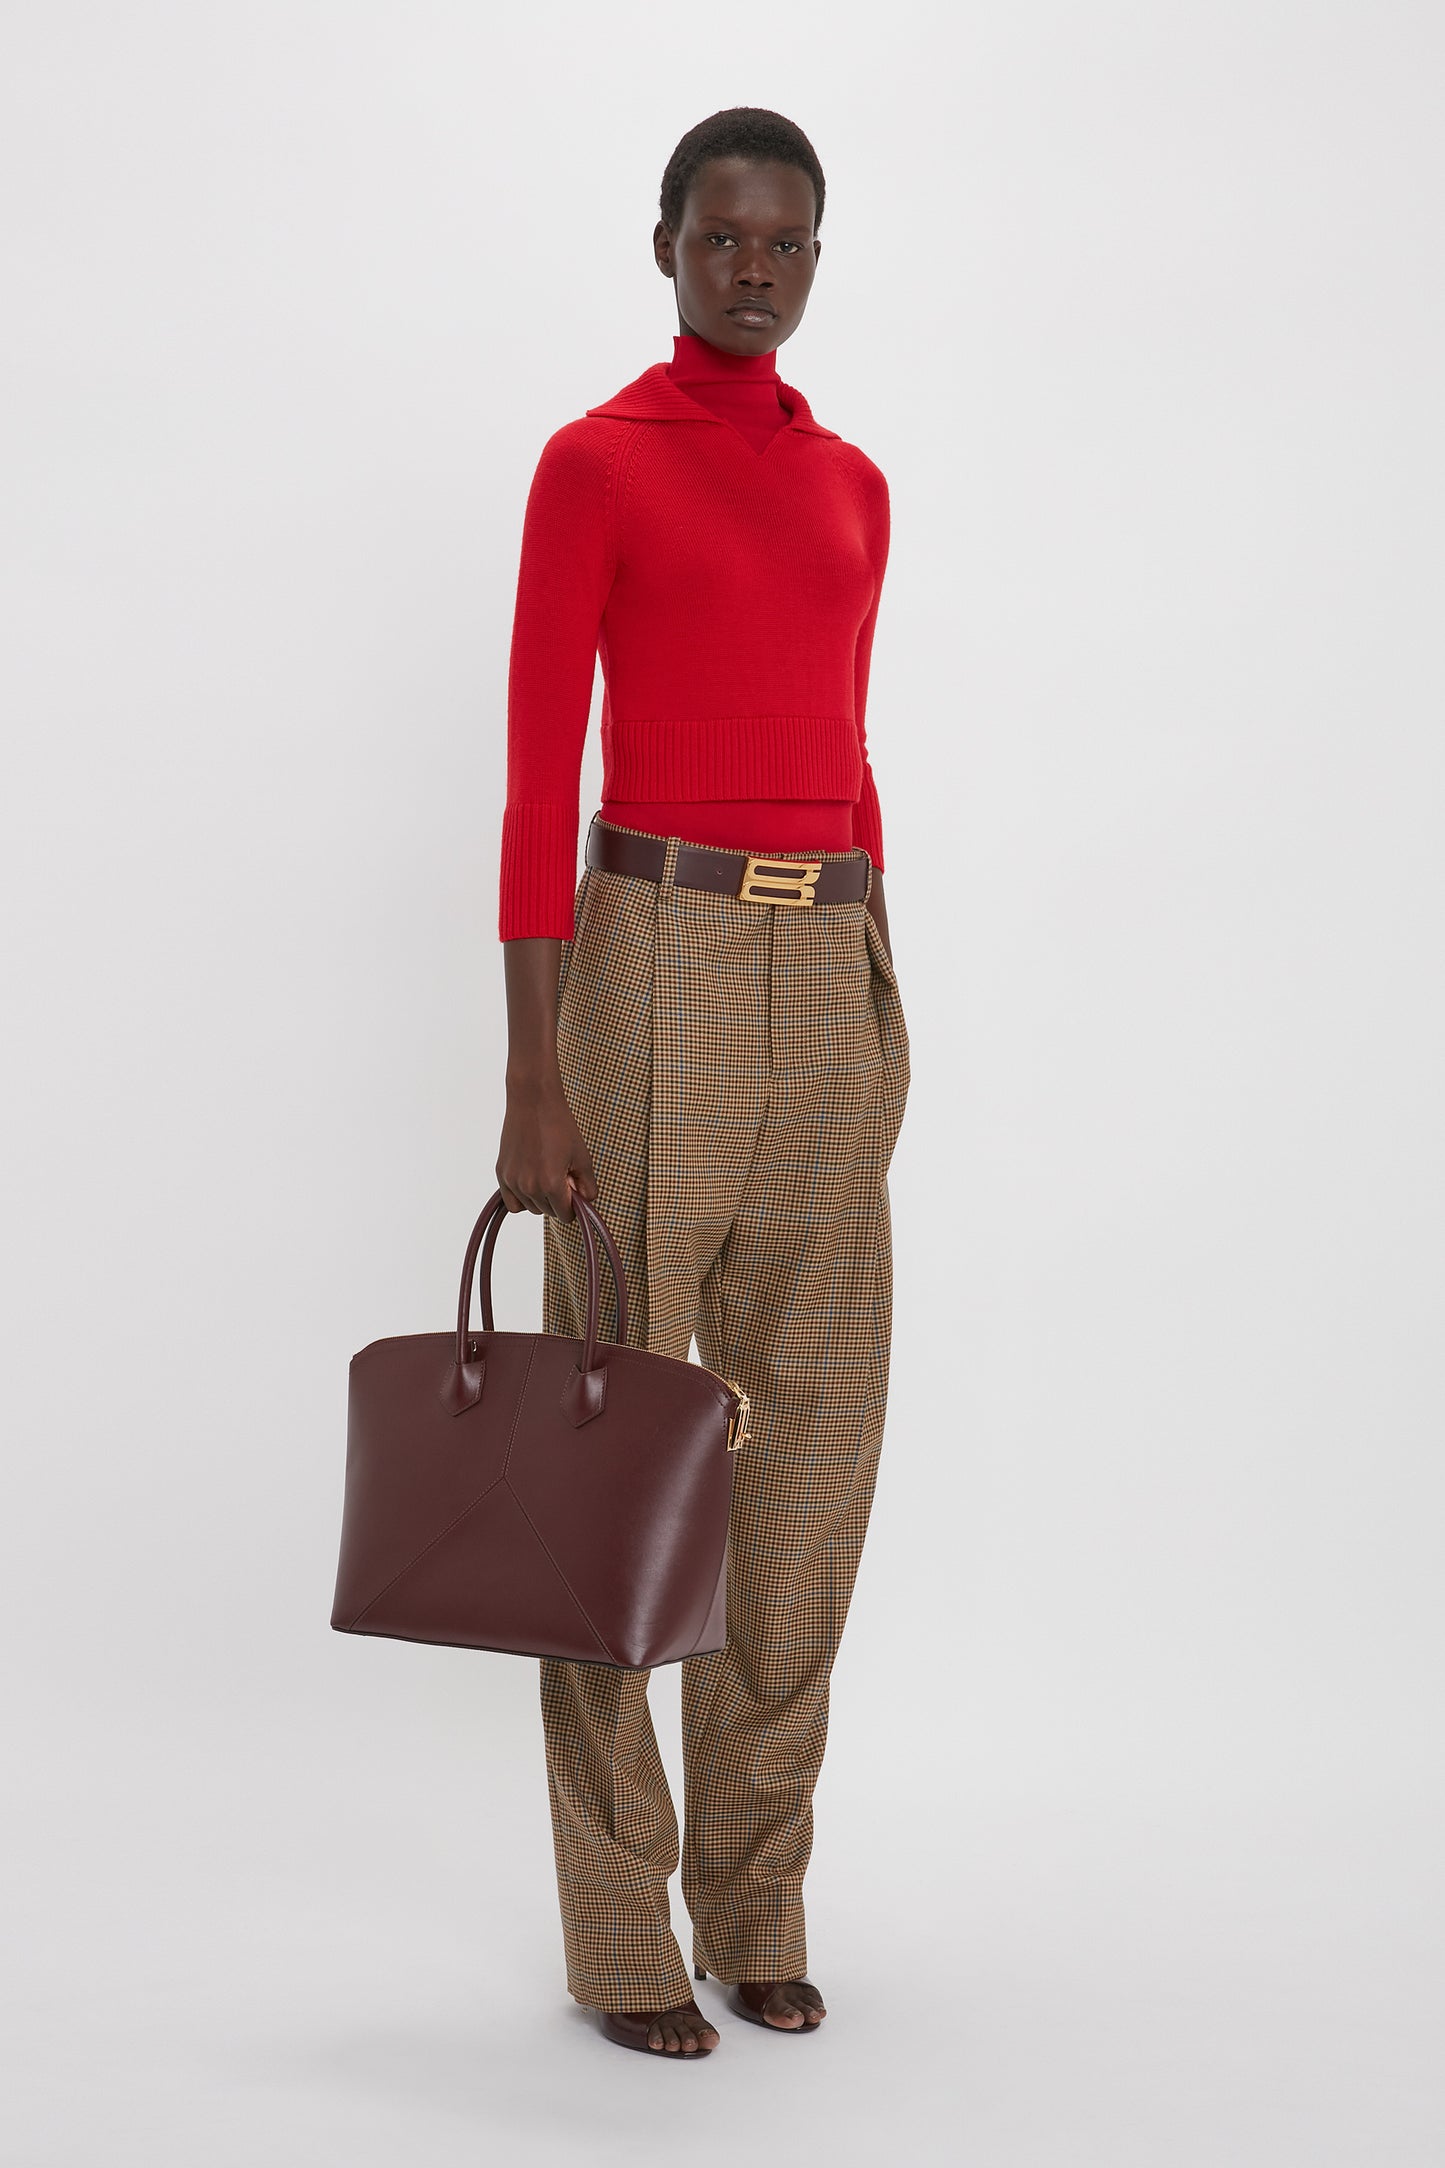 Person wearing a Victoria Beckham Double Layer Top In Deep Red, brown high-waisted pants with a gold belt, and holding a dark brown handbag stands against a plain white background.